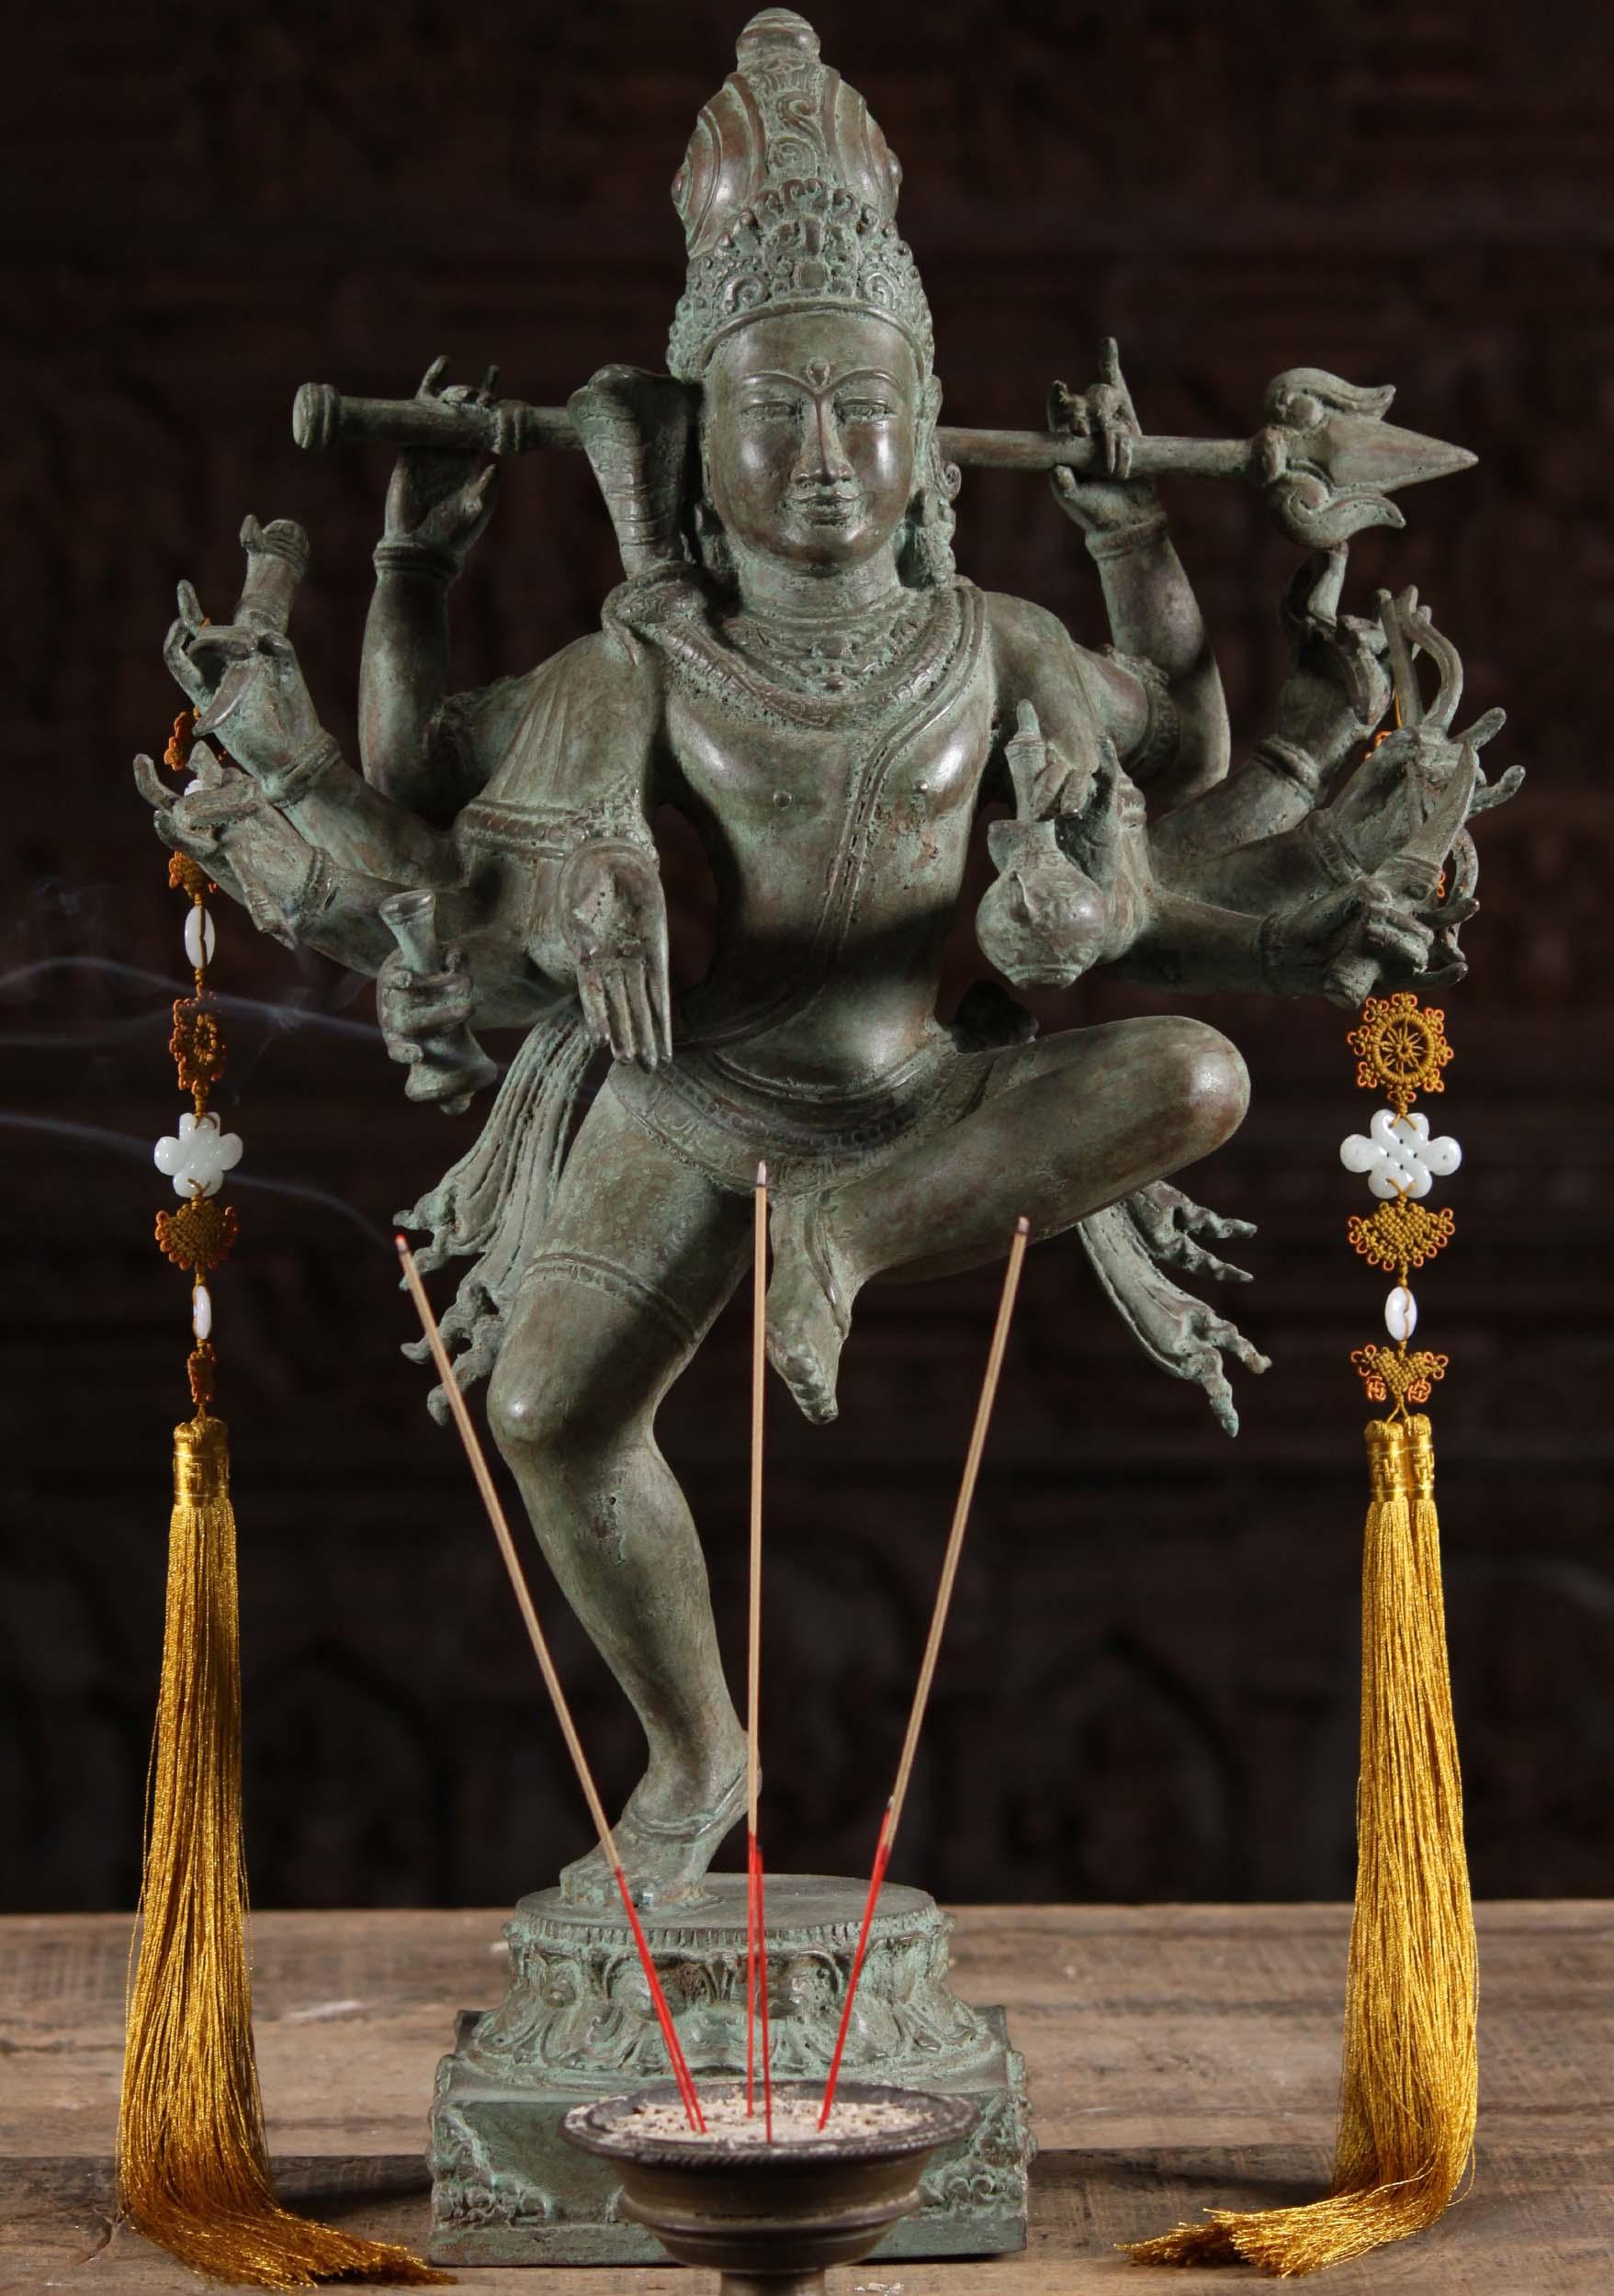 Sold Brass Dancing Shiva Statue With 10 Arms 24 81bb29 Hindu Gods And Buddha Statues